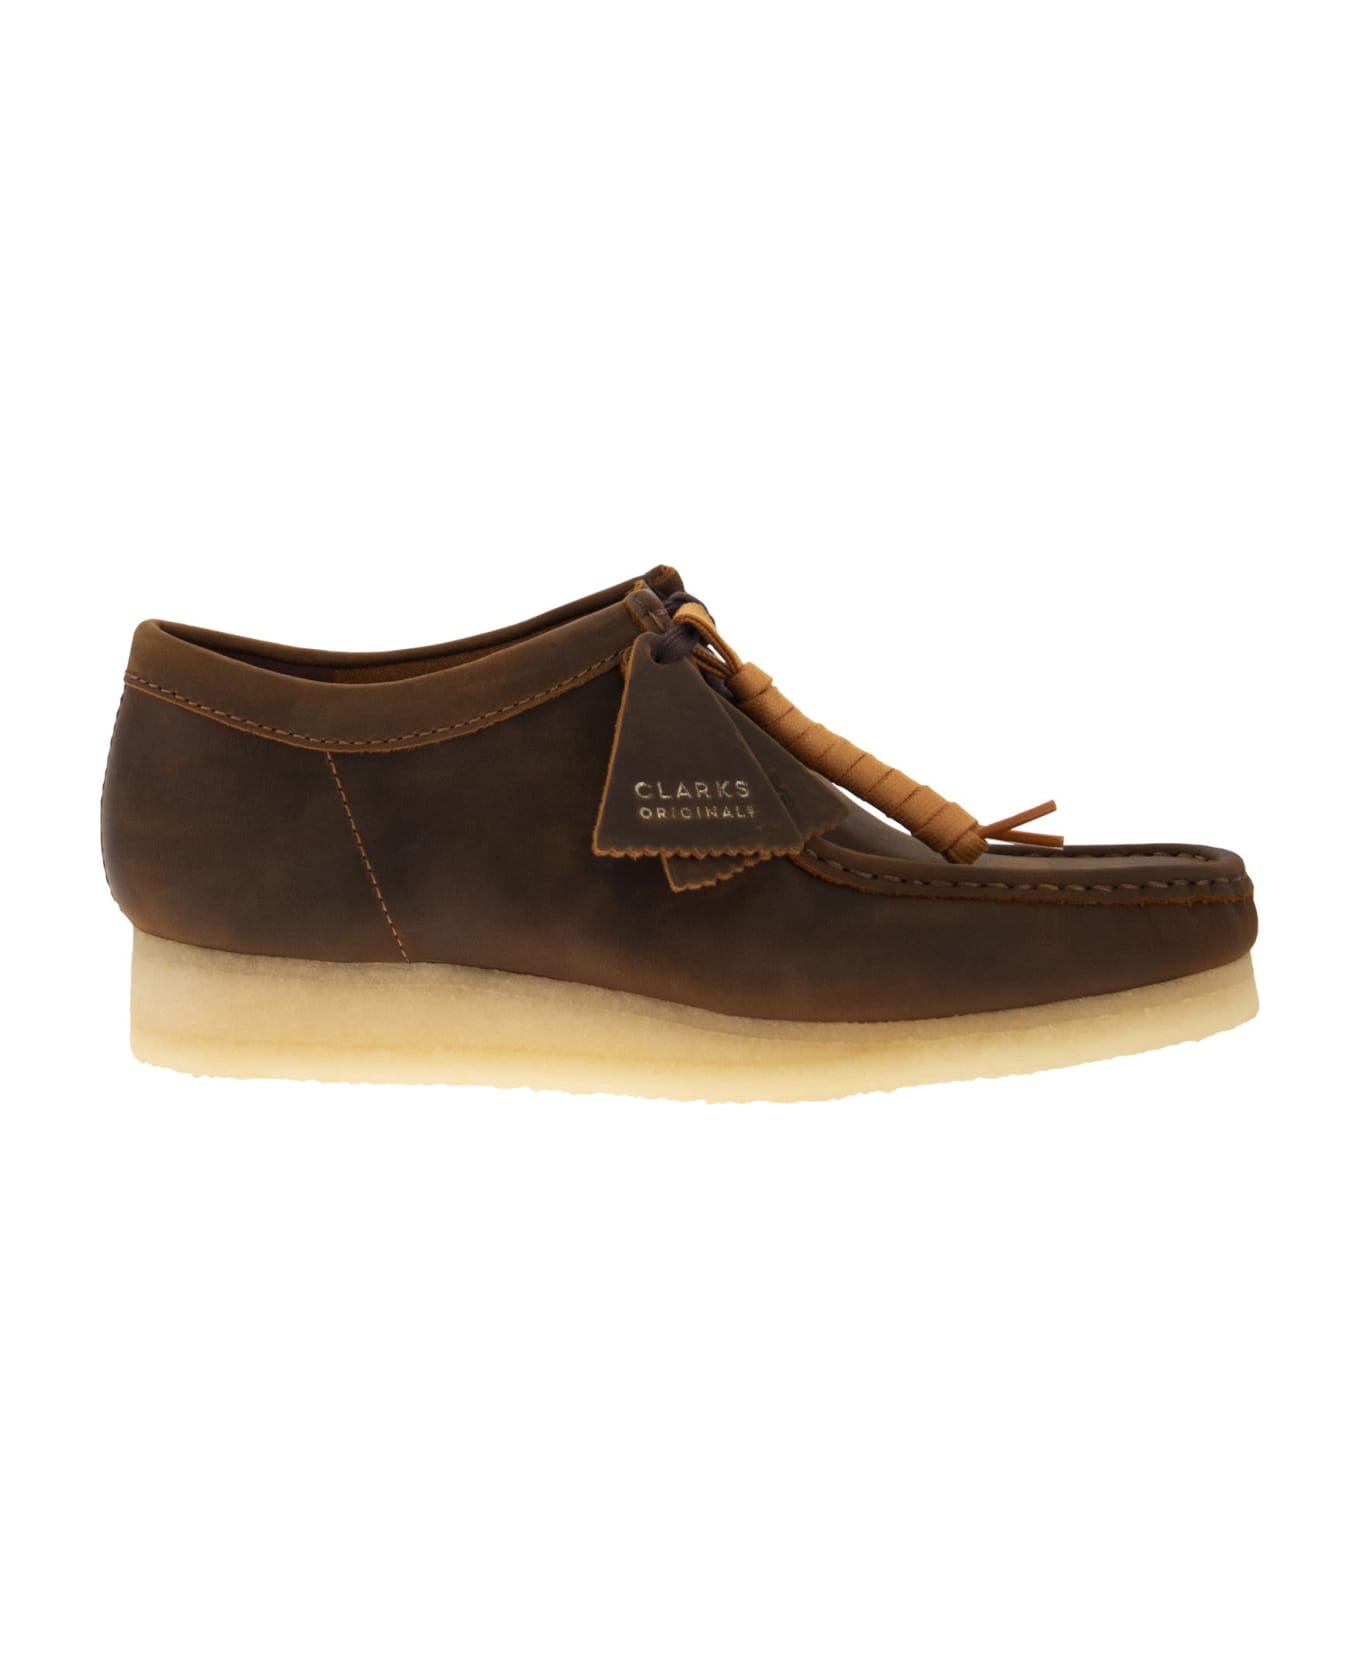 Clarks Wallabee - Suede Leather Shoe - Chocolate ローファー＆デッキシューズ